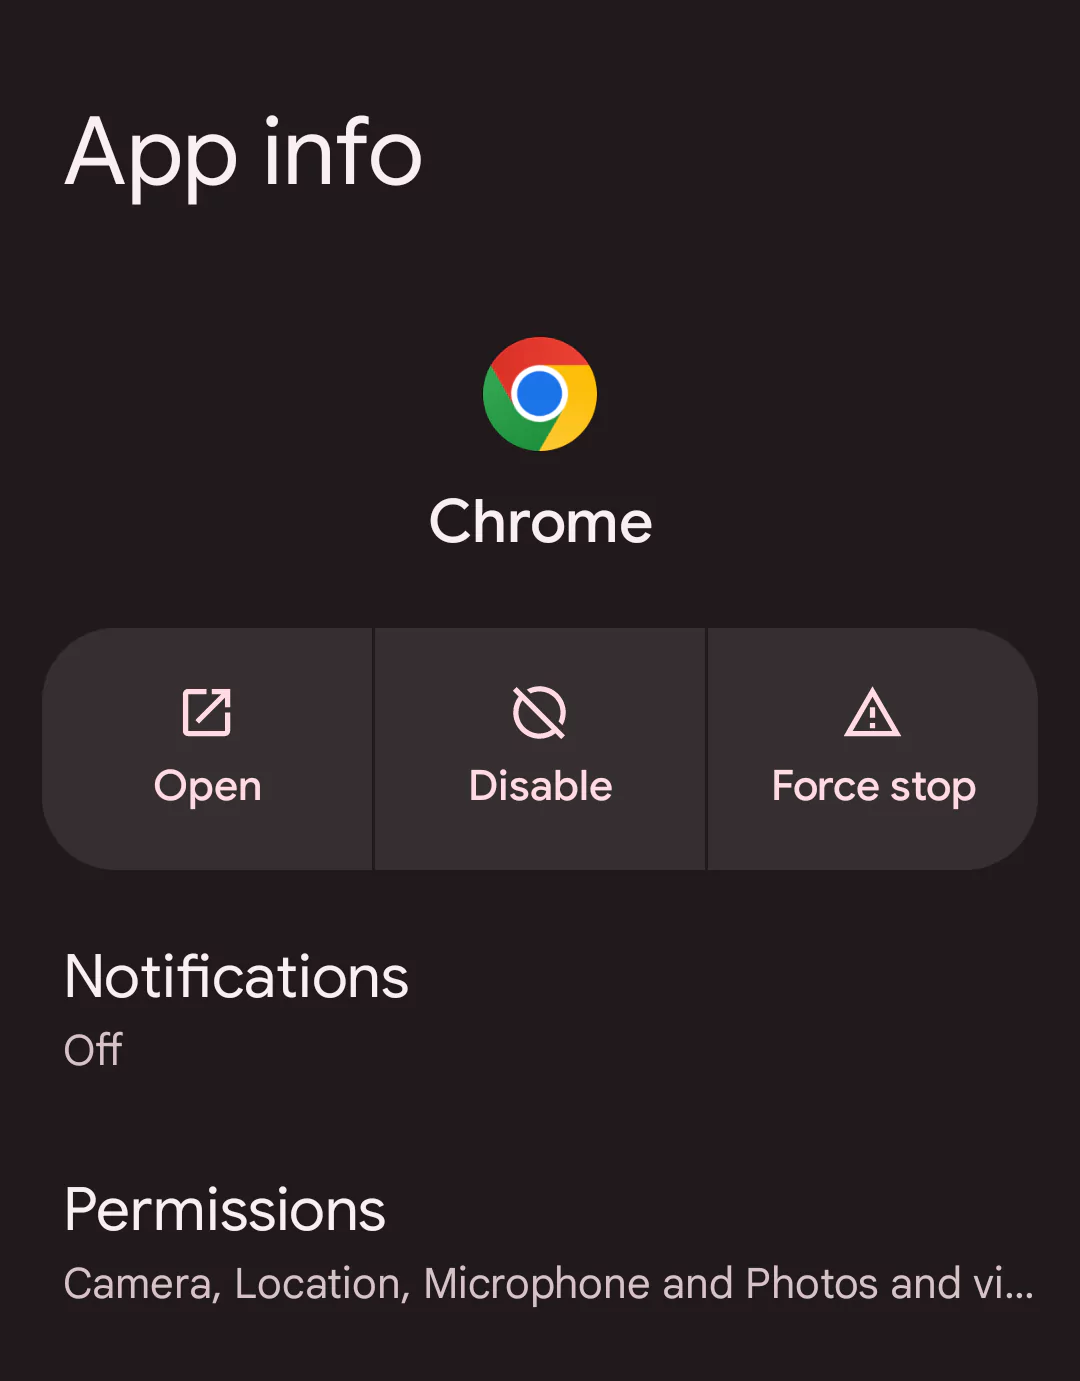 chrome app info from android with force stop